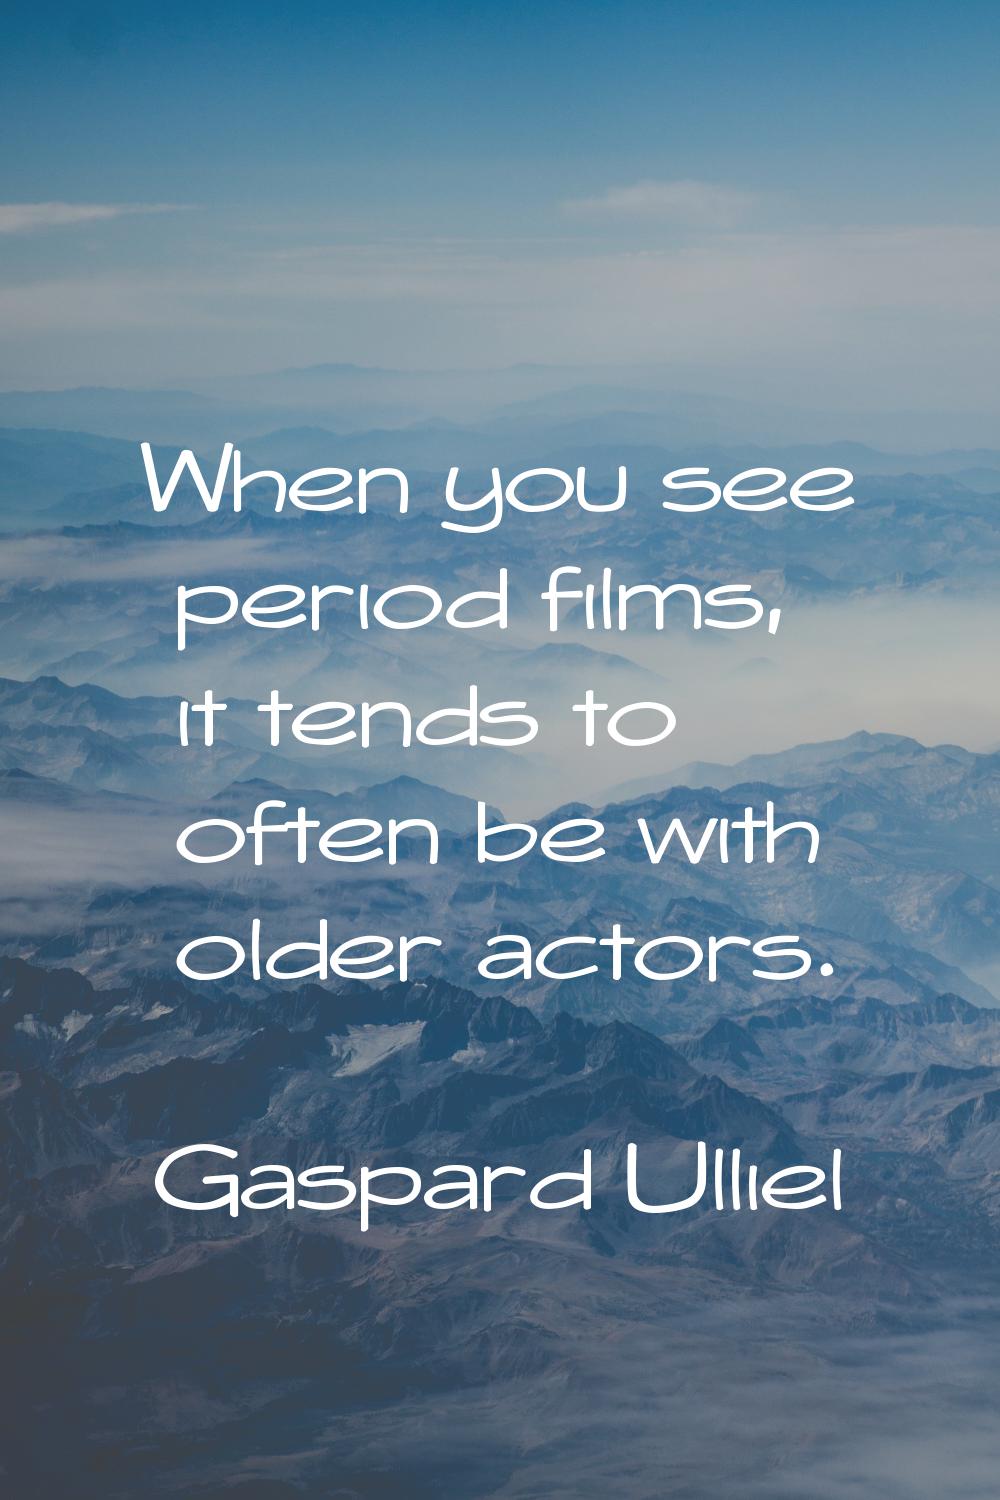 When you see period films, it tends to often be with older actors.